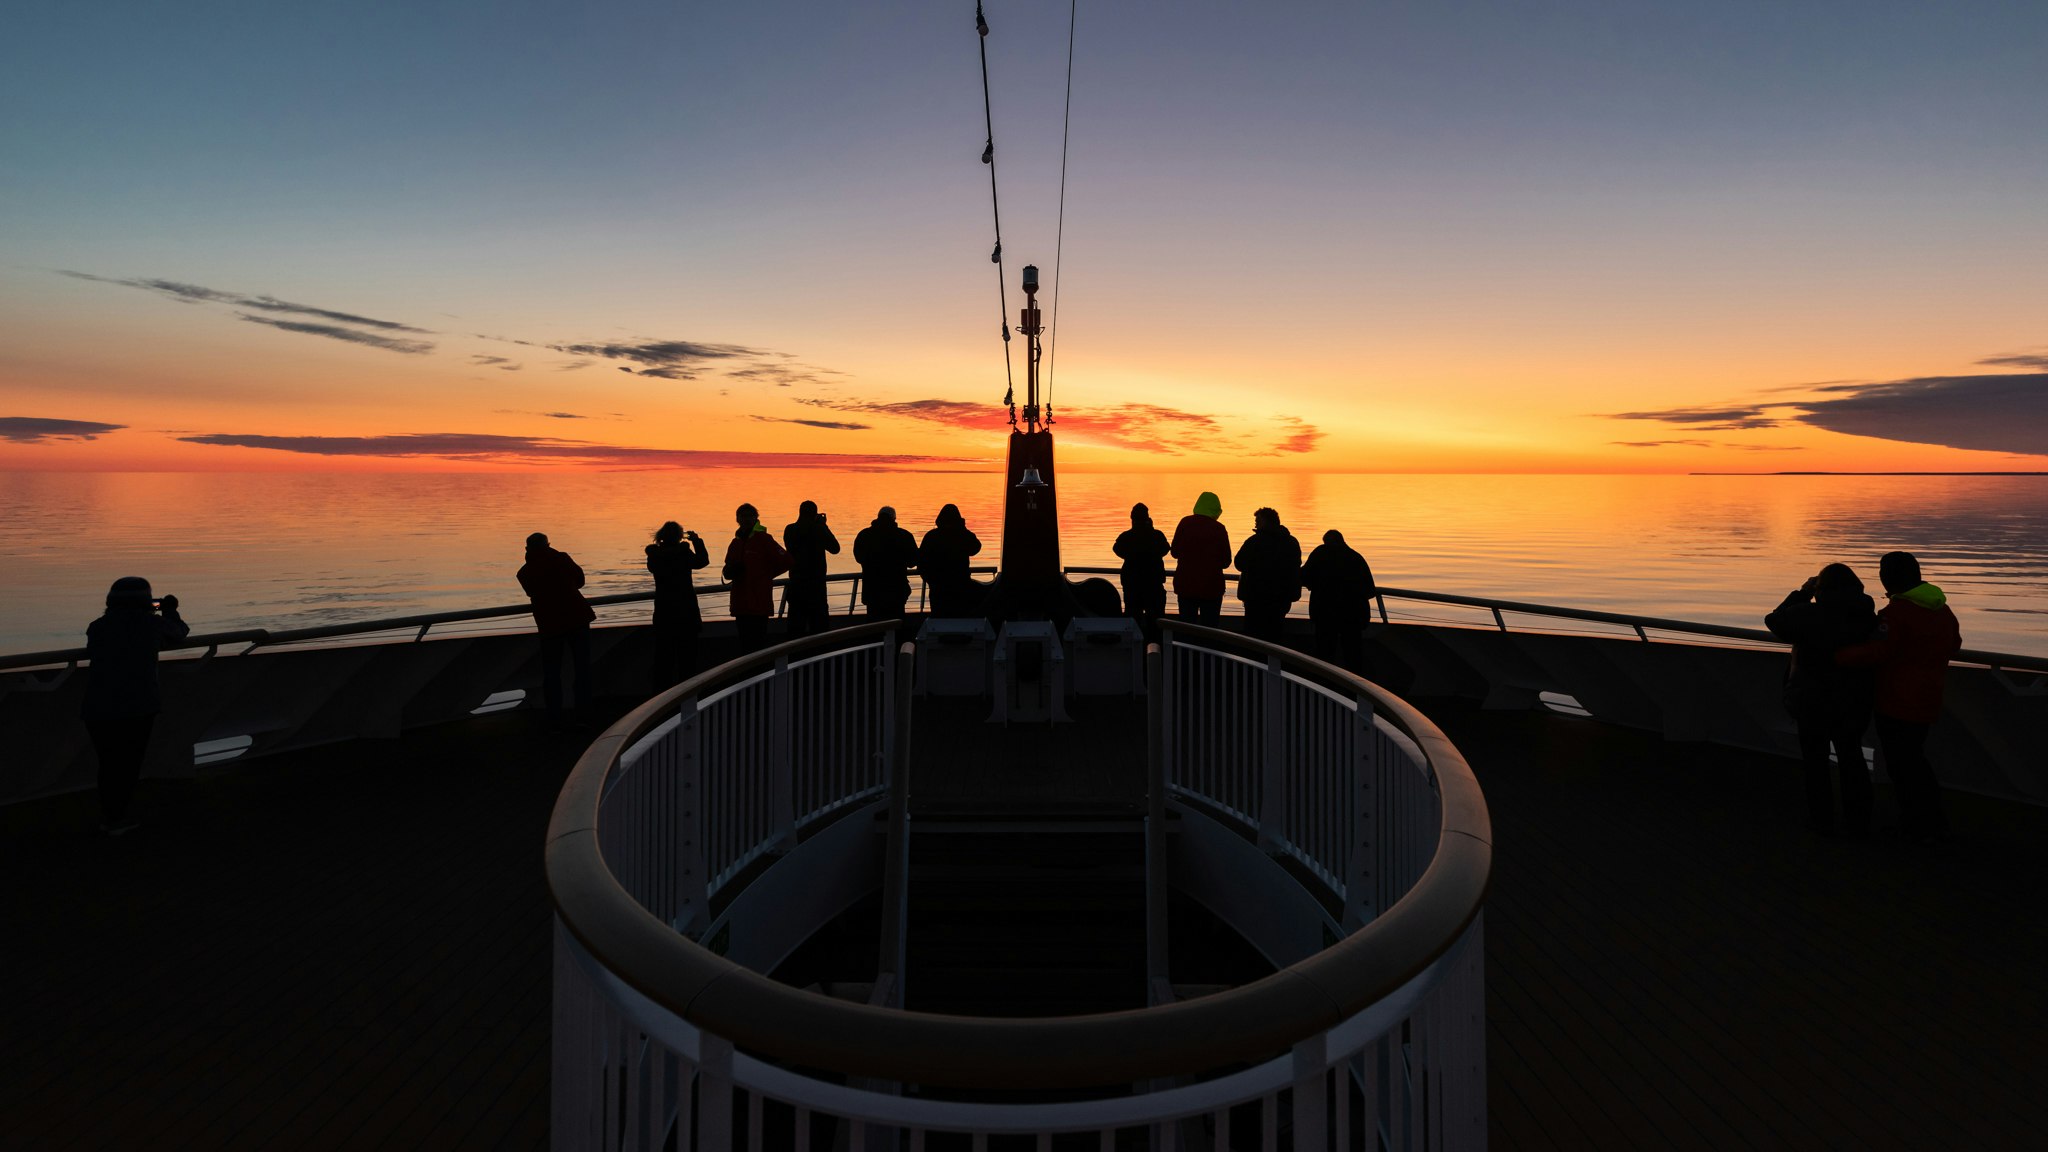 People looking out on the sea at sunset from the Roald Amundsen ship